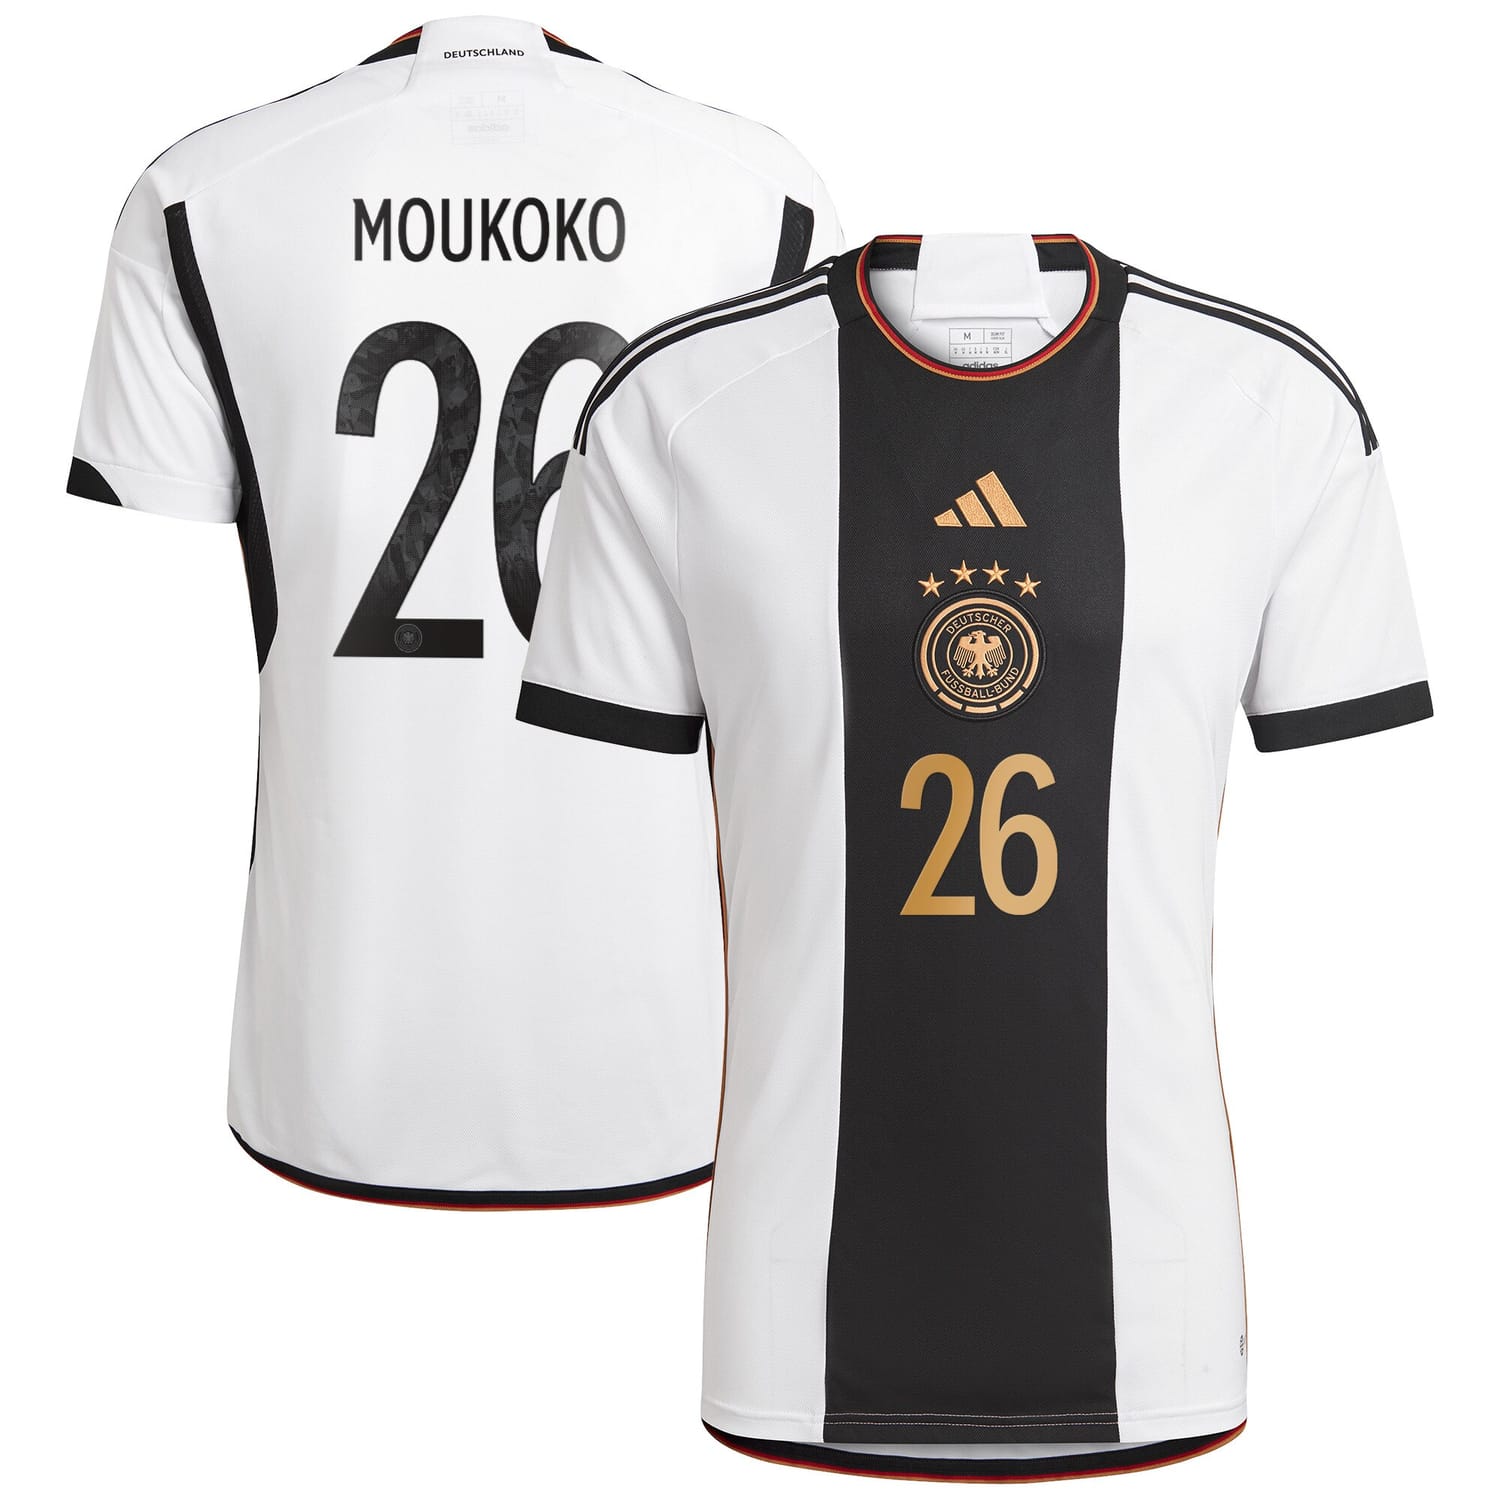 Germany National Team Home Jersey Shirt 2022 player Youssoufa Moukoko 26 printing for Men